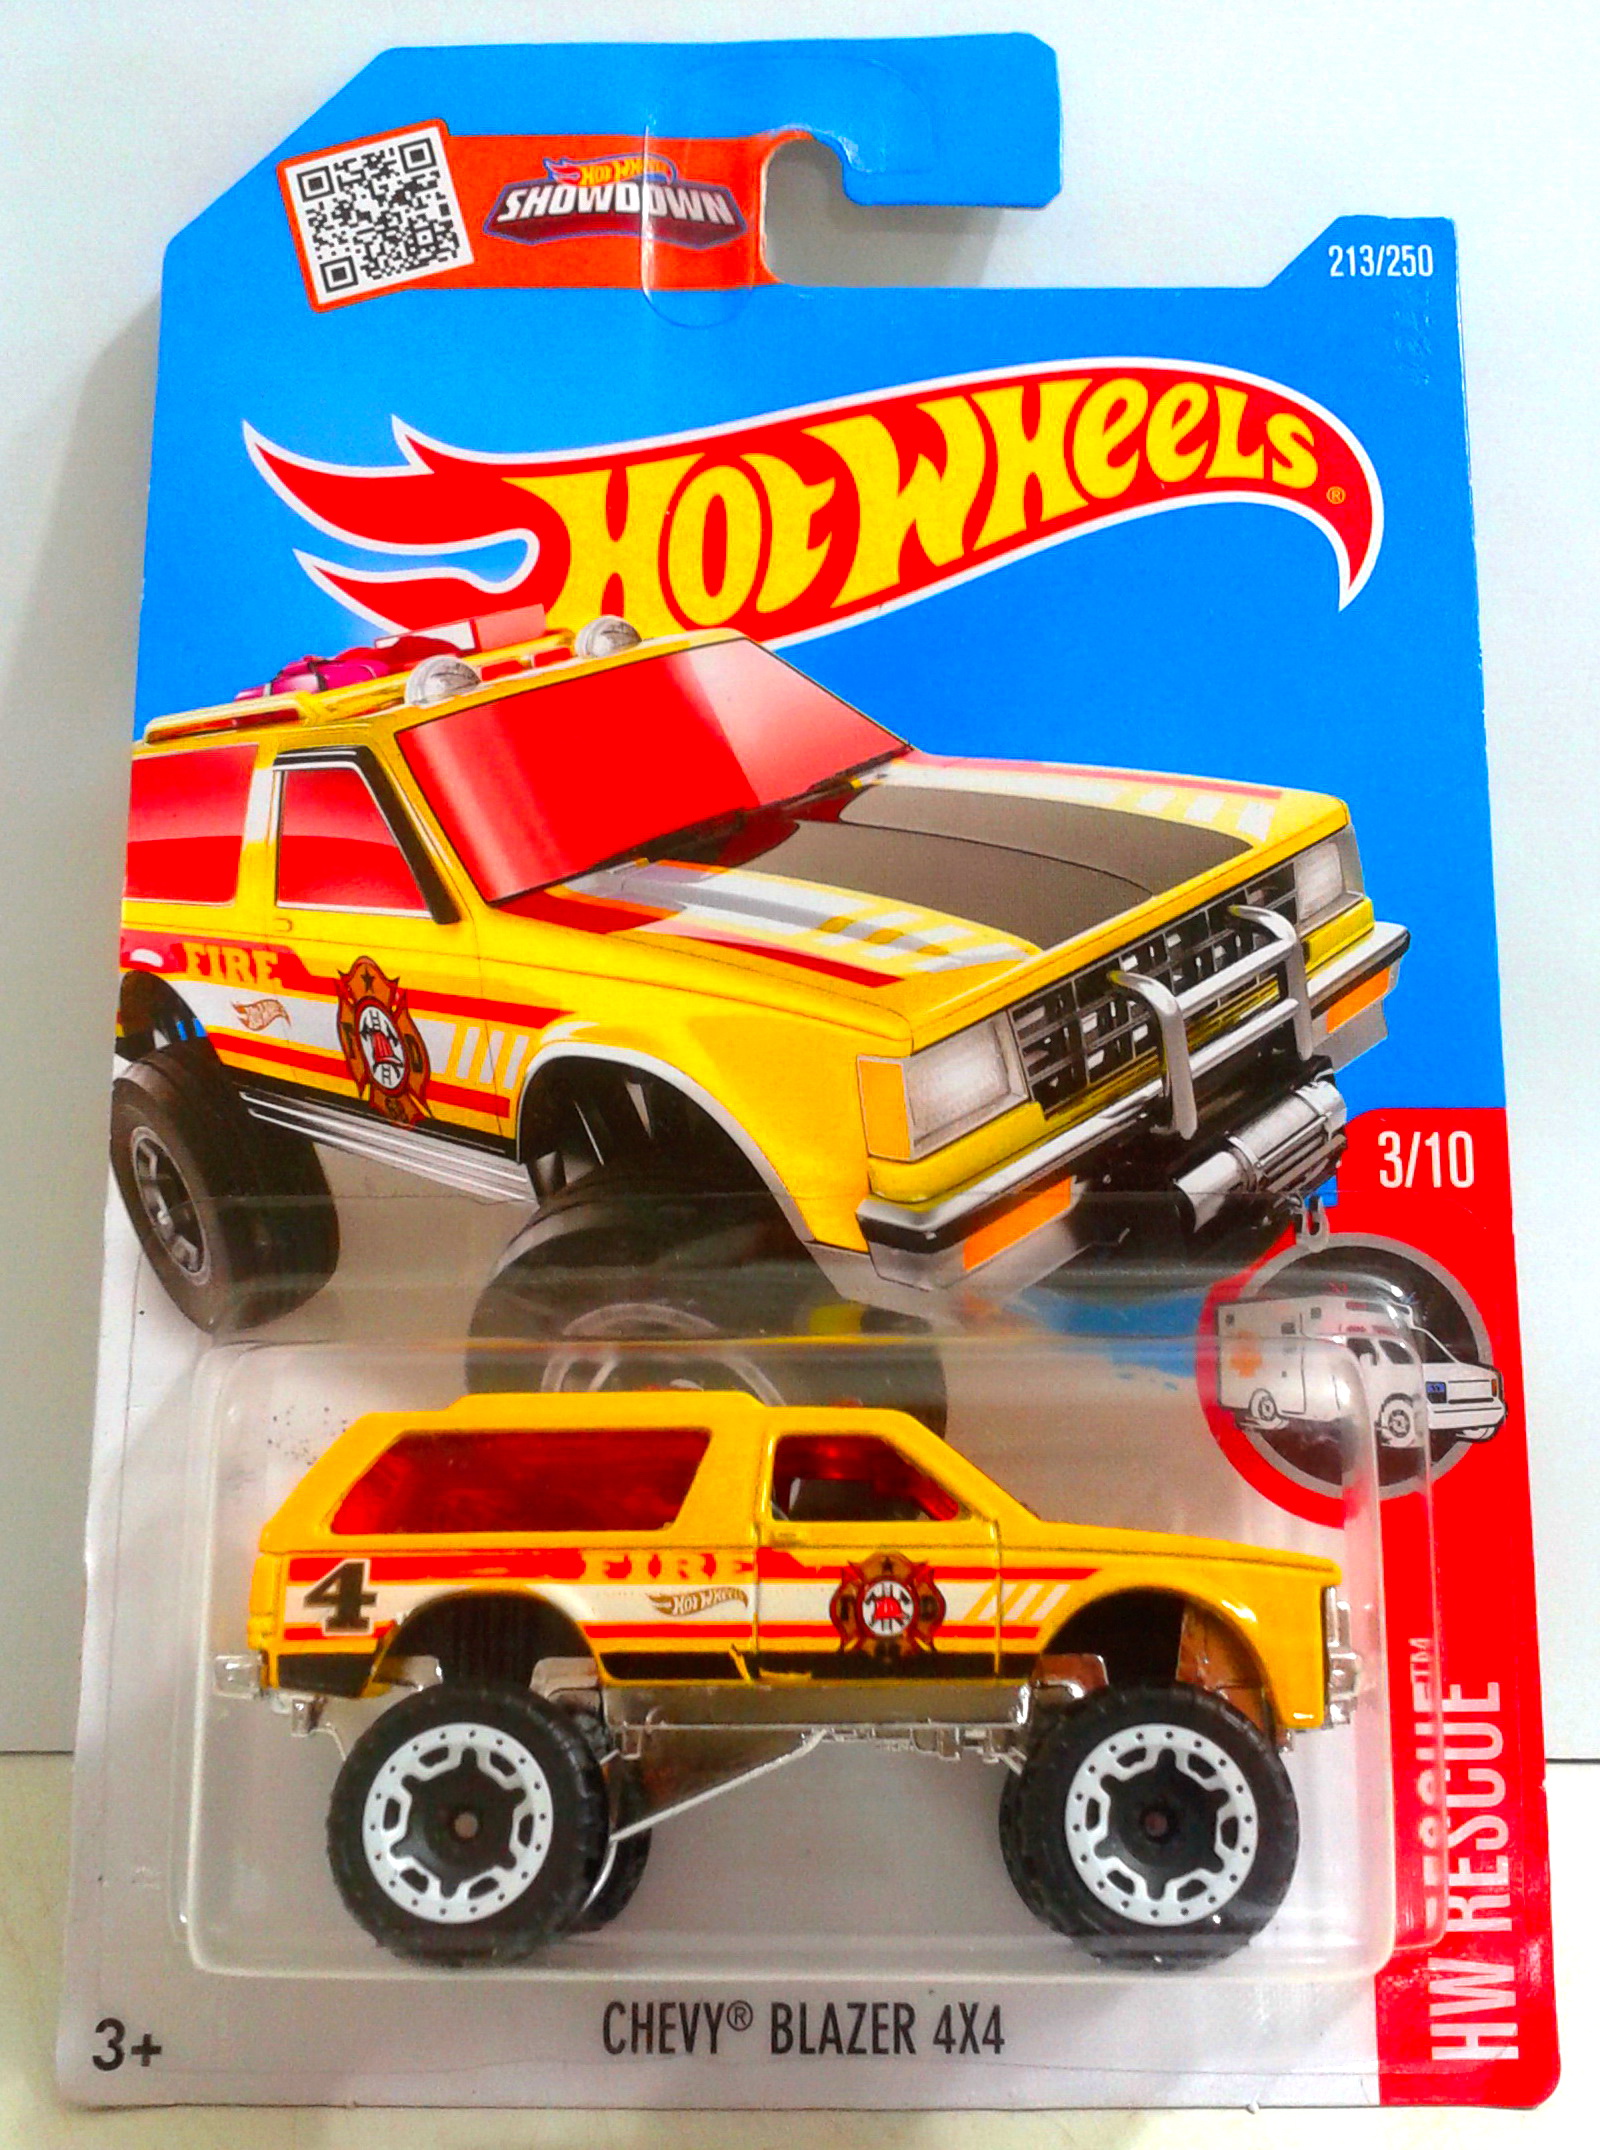 Contemporary Manufacture Red 2016 Hot Wheels Hw Rescue 3 10 Chevy Blazer 4x4 213 250 Int Card Toys Hobbies Sc Uat Com - details about roblox mix and match days of knight 4 figure pack pretend game play kid toy fun